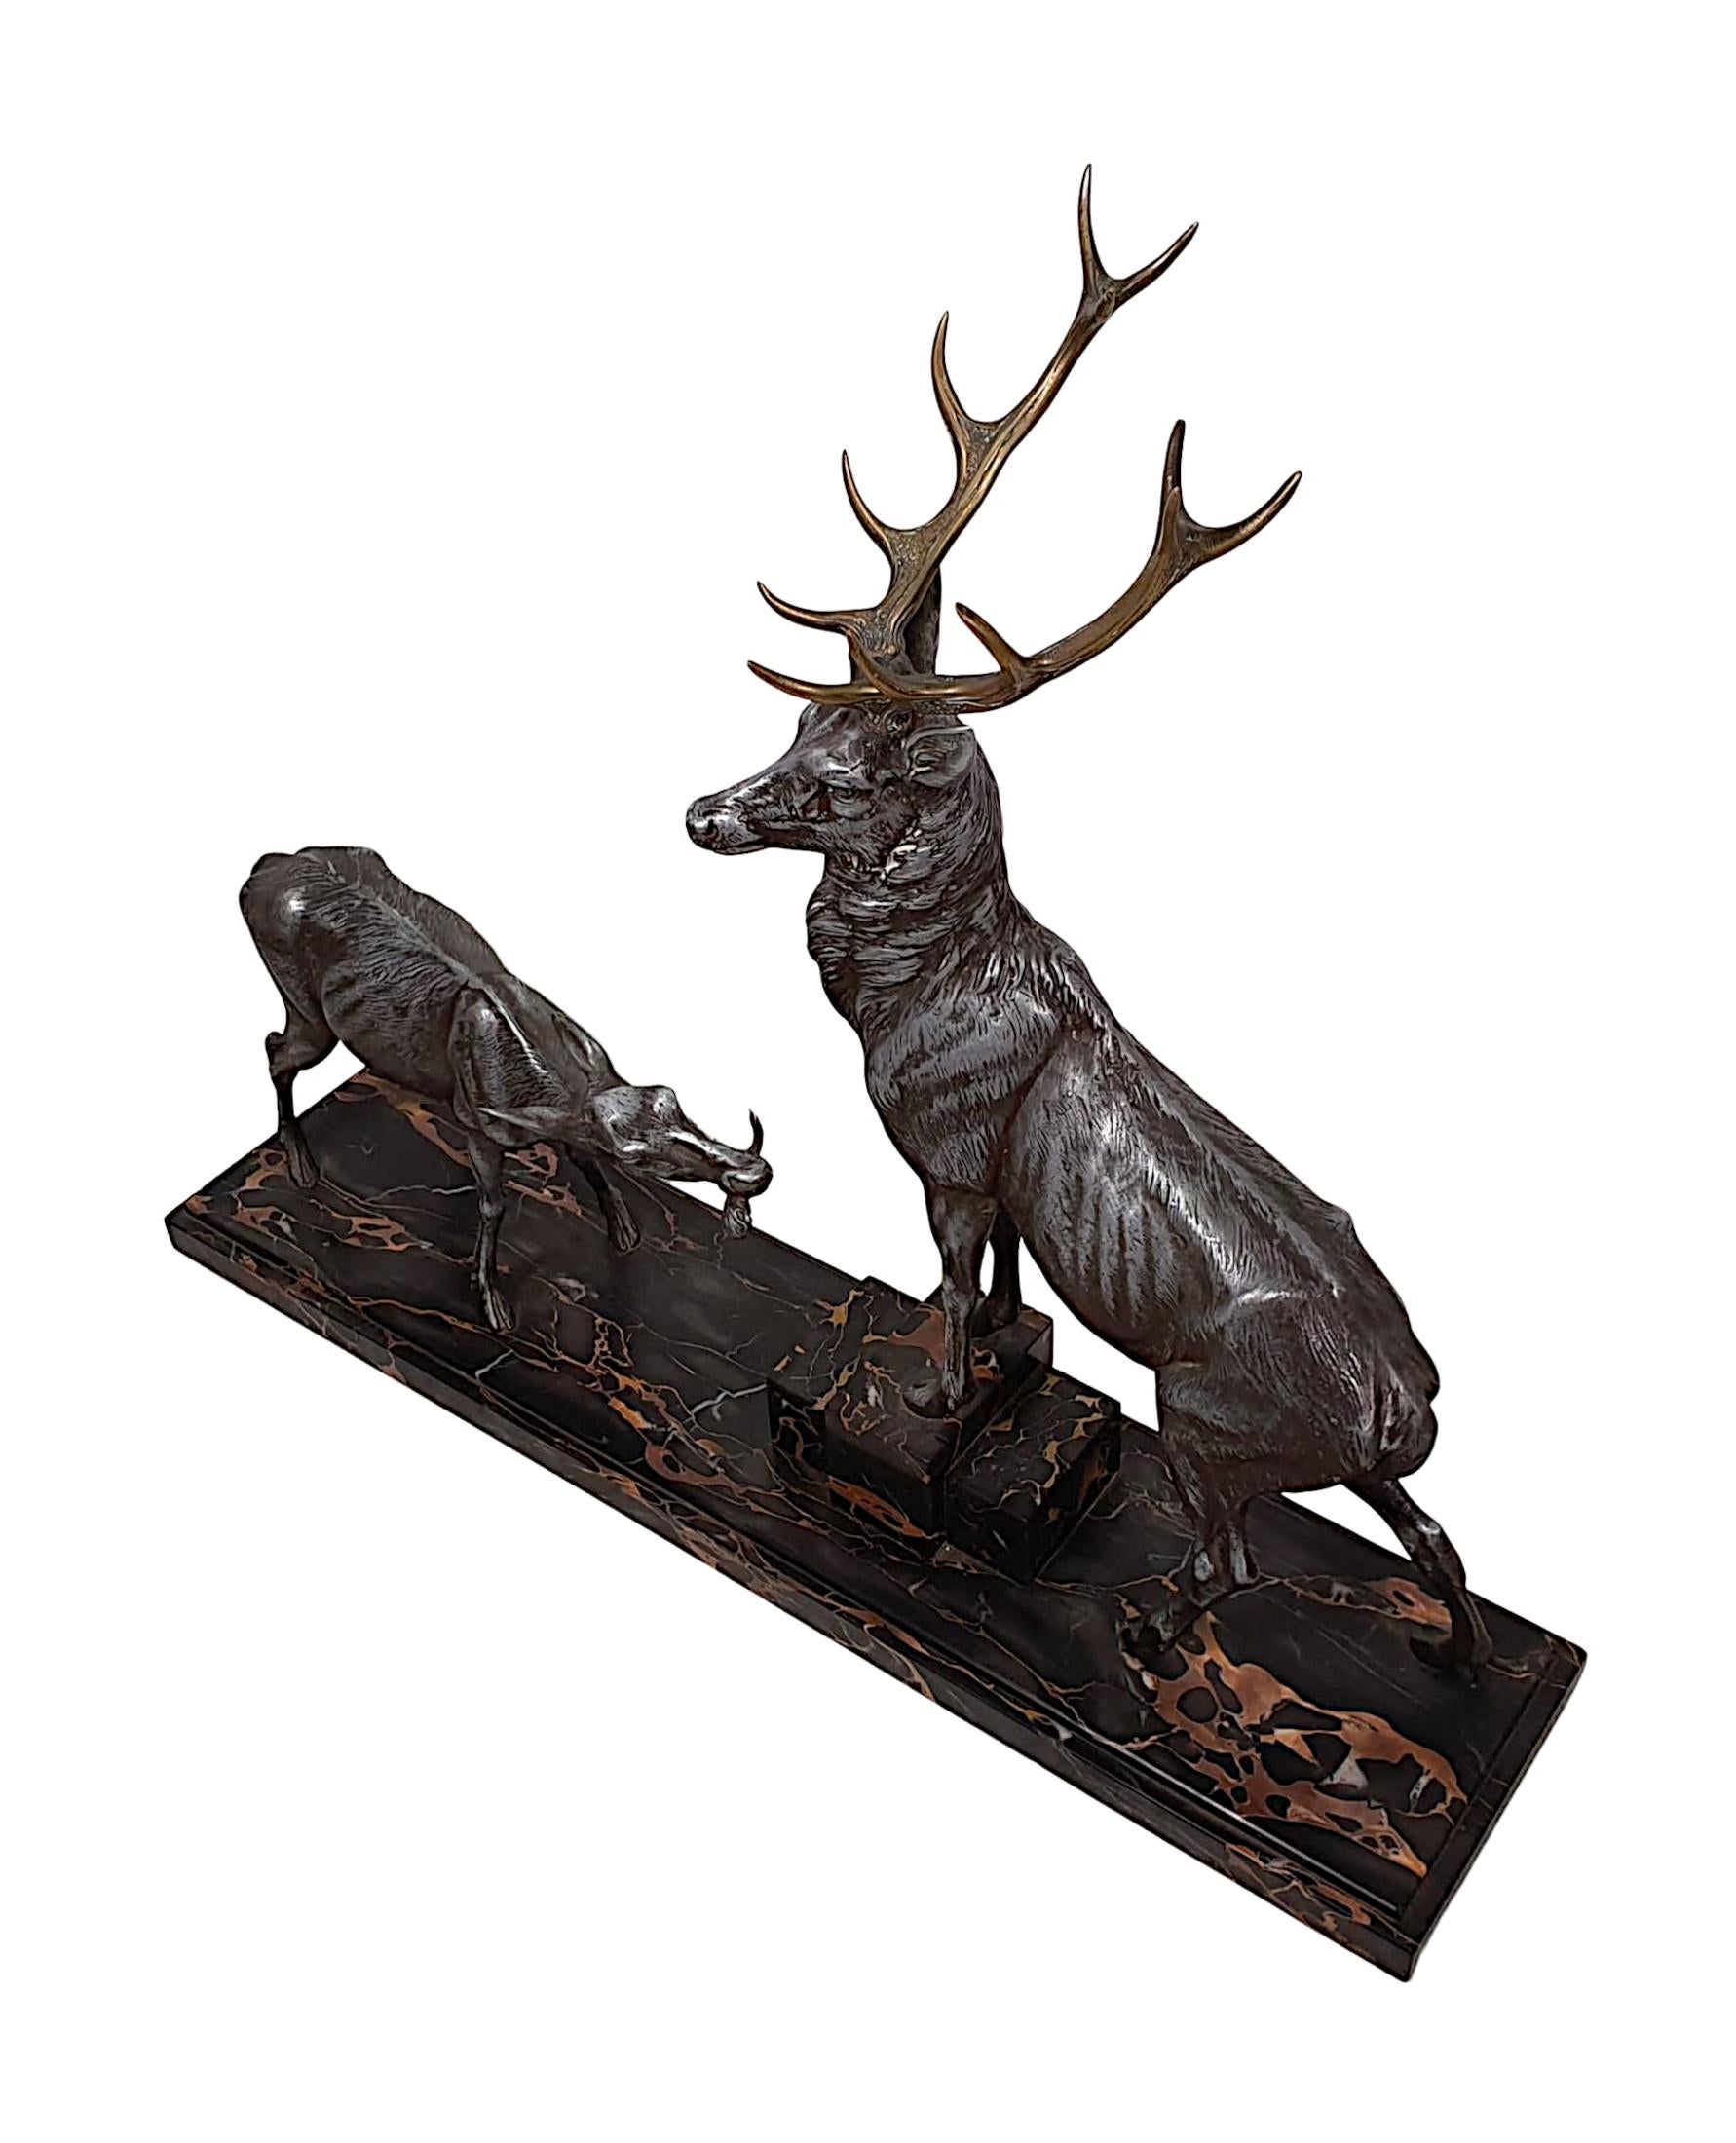 A very fine Art Deco metal and brass animalier sculpture of a stag and doe by Louis Albert Carvin, mounted on a stunning moulded Italian black and orange Margraf marble stepped base of rectangular form, signed L. Carvin.